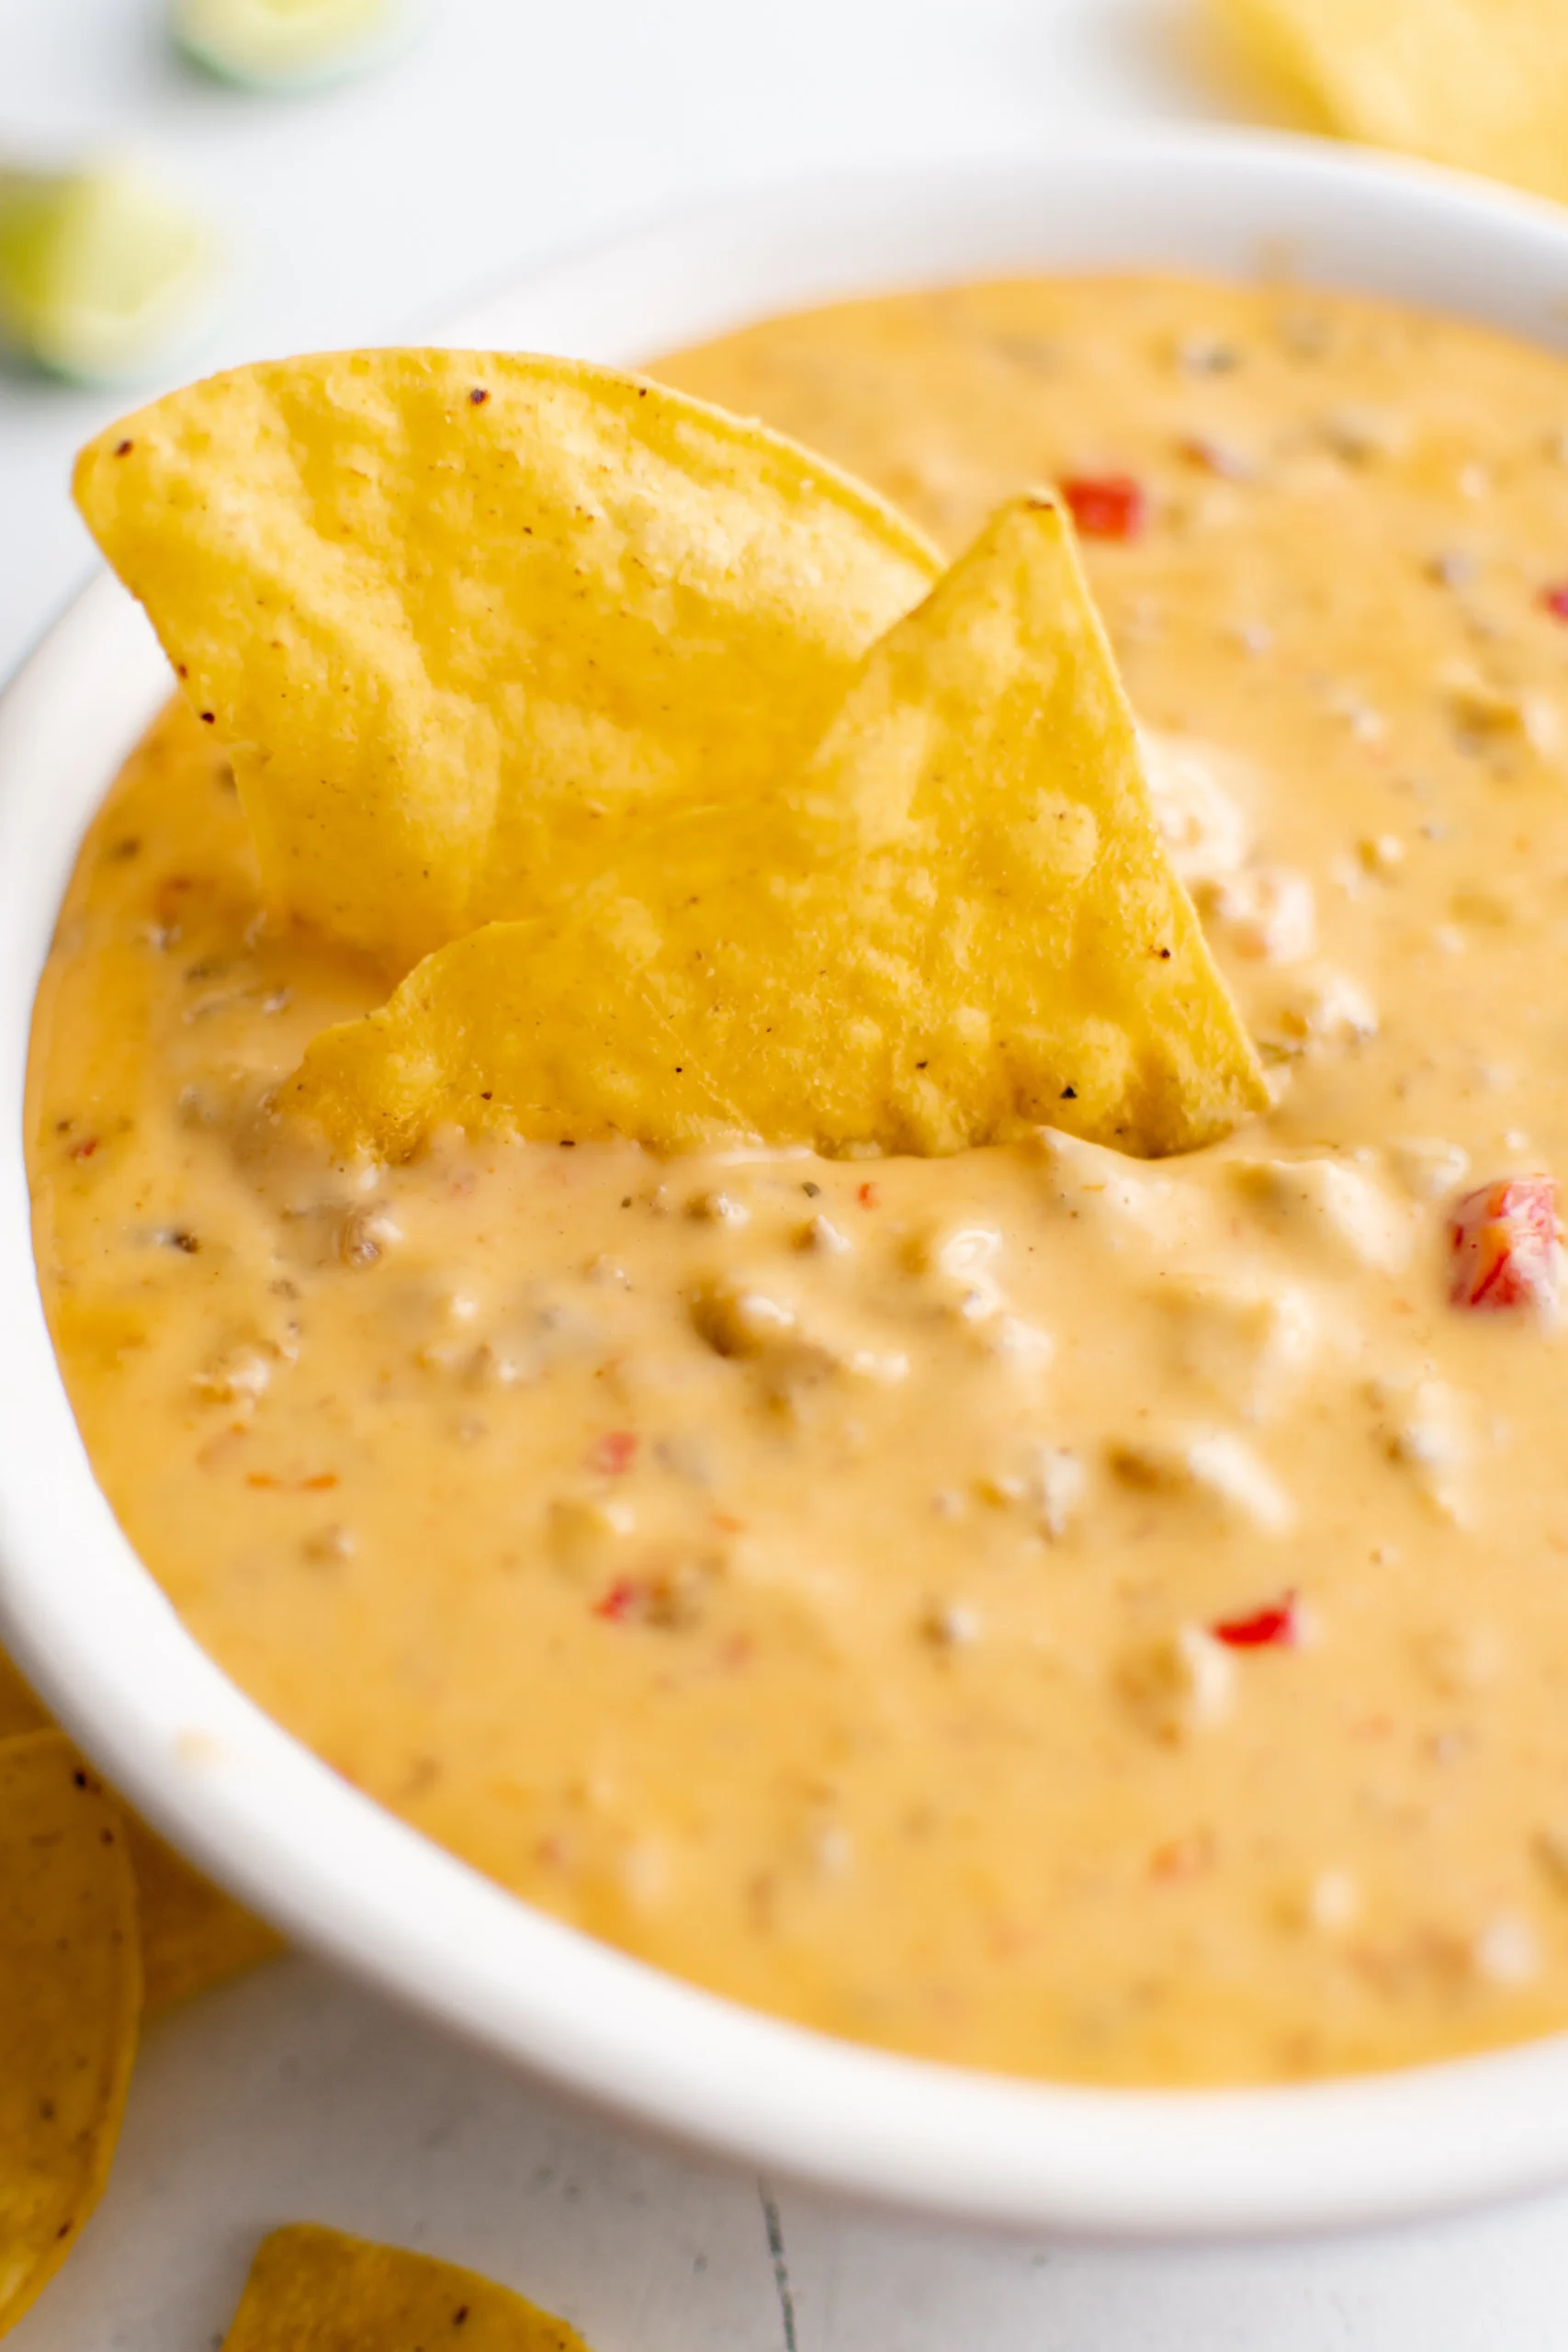 A delicious bowl of ground sausage dip with a chip in it.